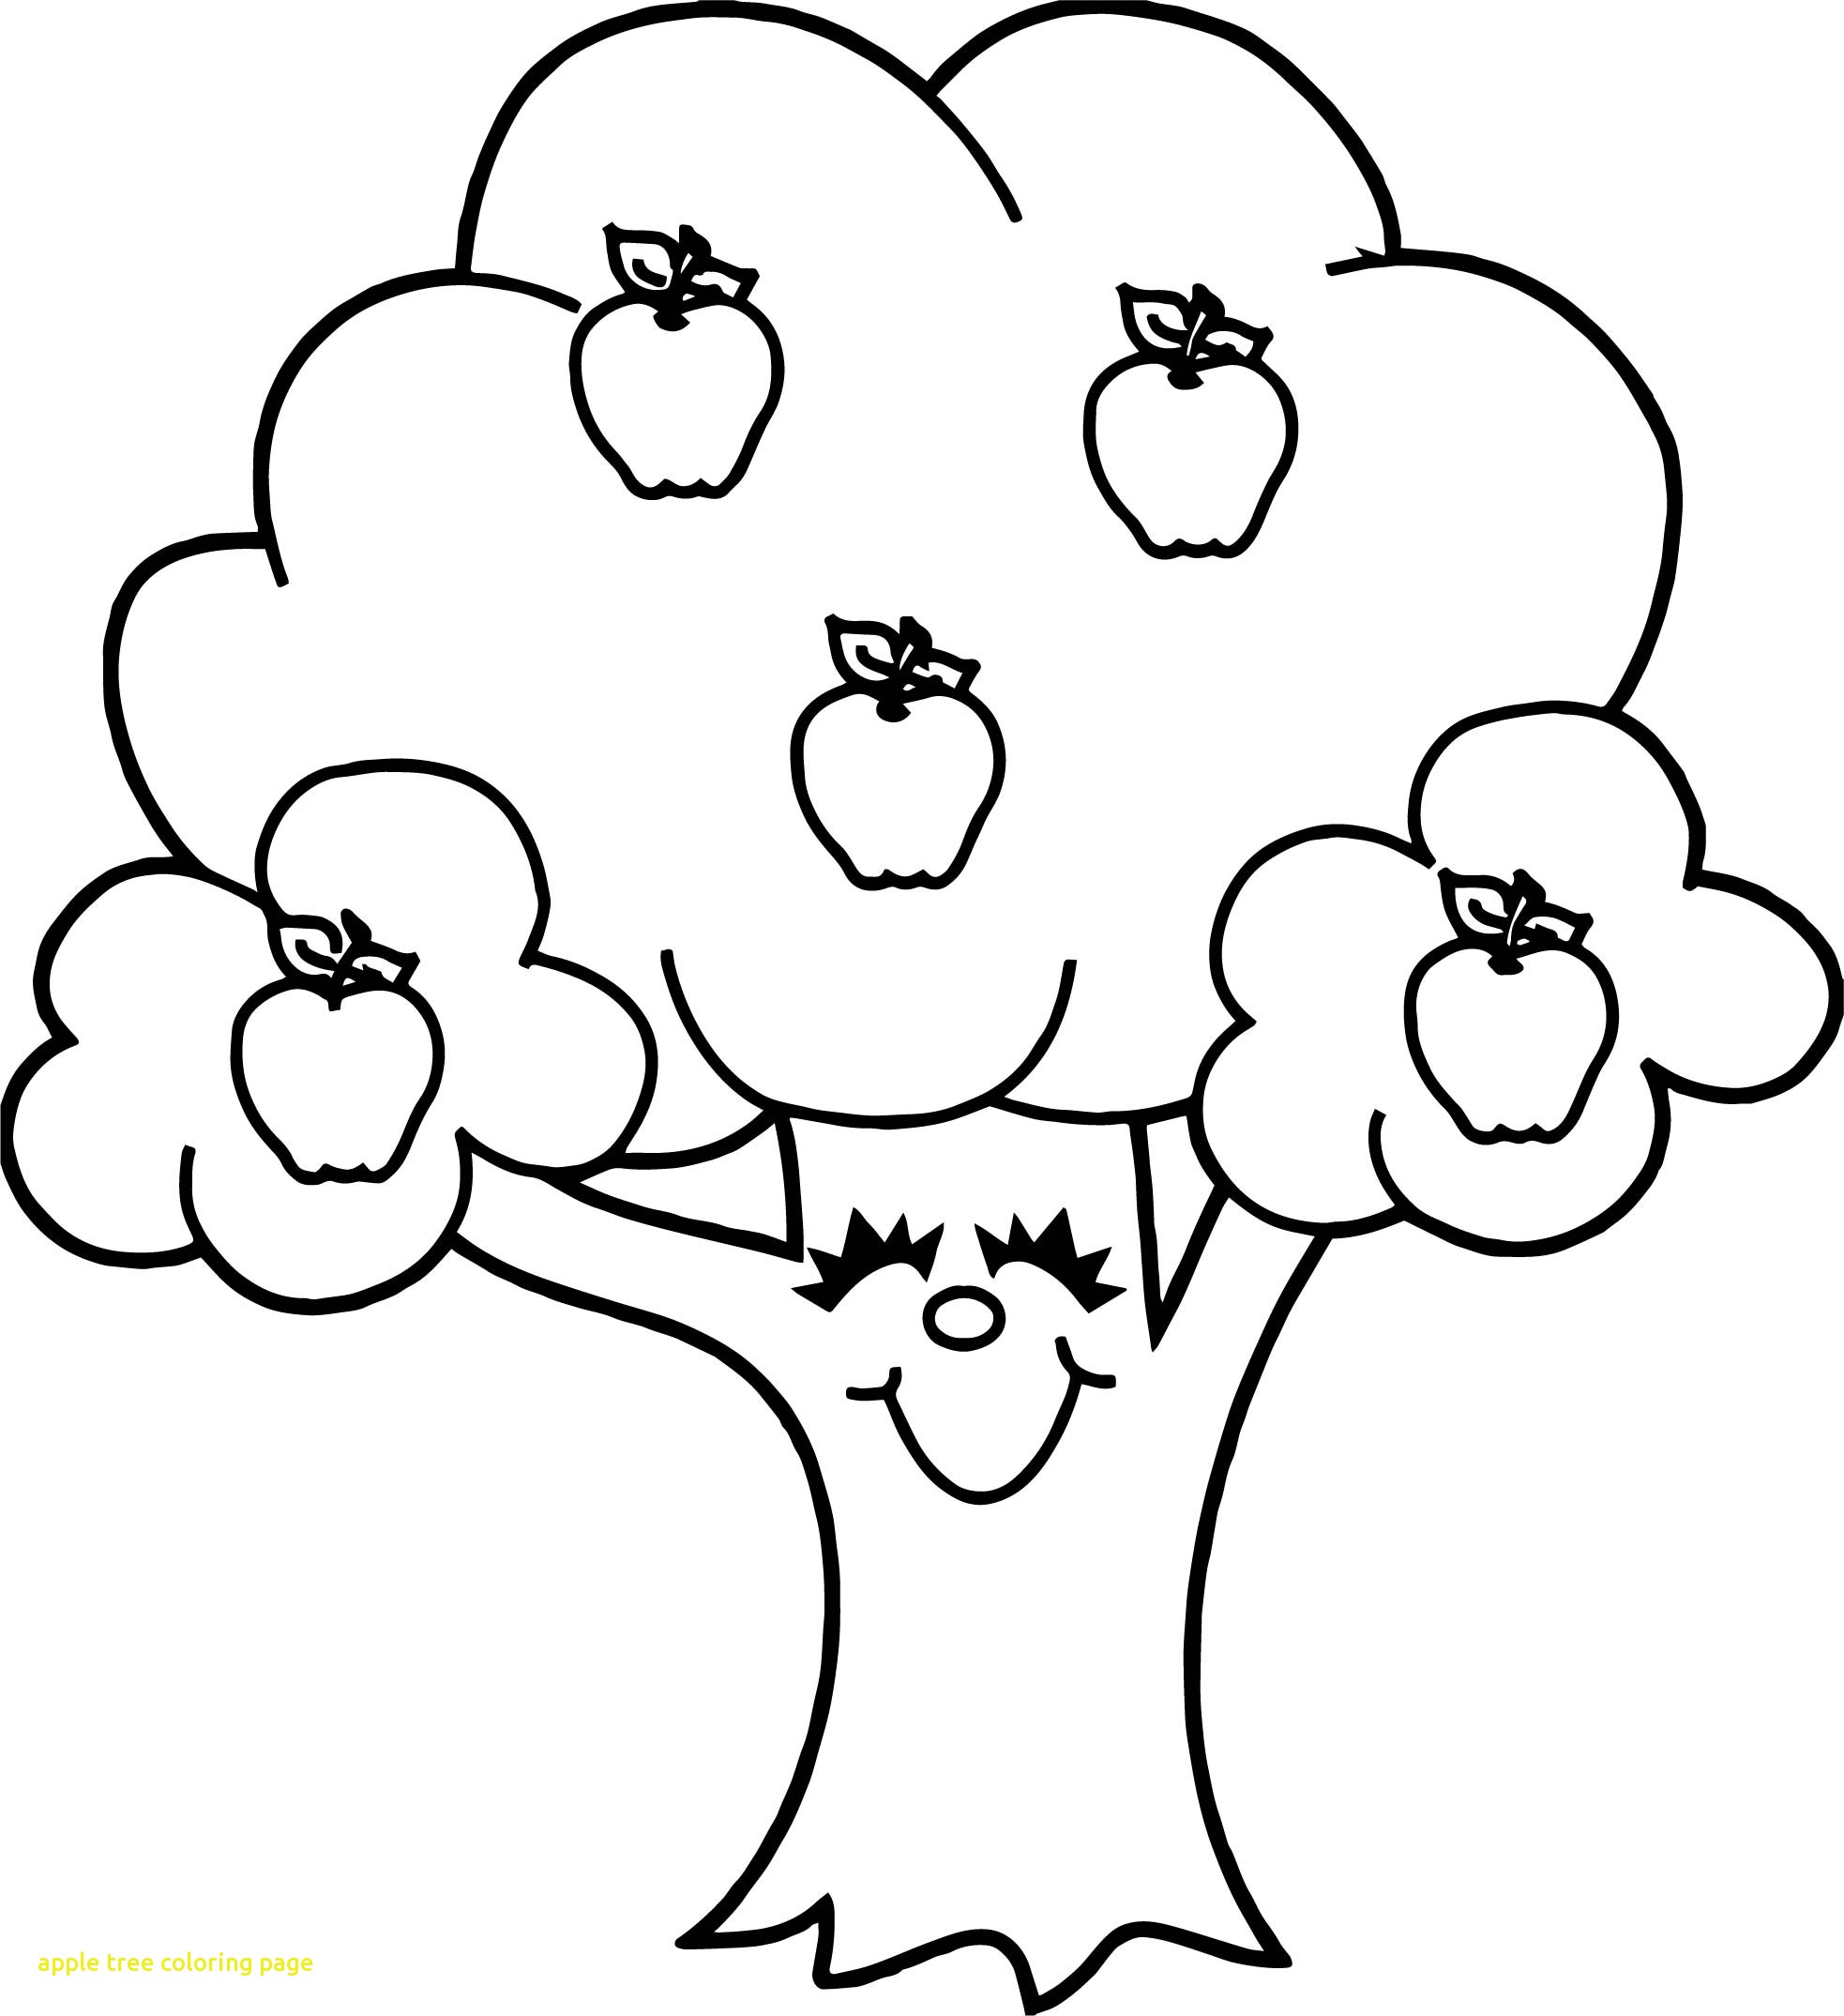 Cute Apple Tree Coloring Page Free Printable Coloring Pages For Kids